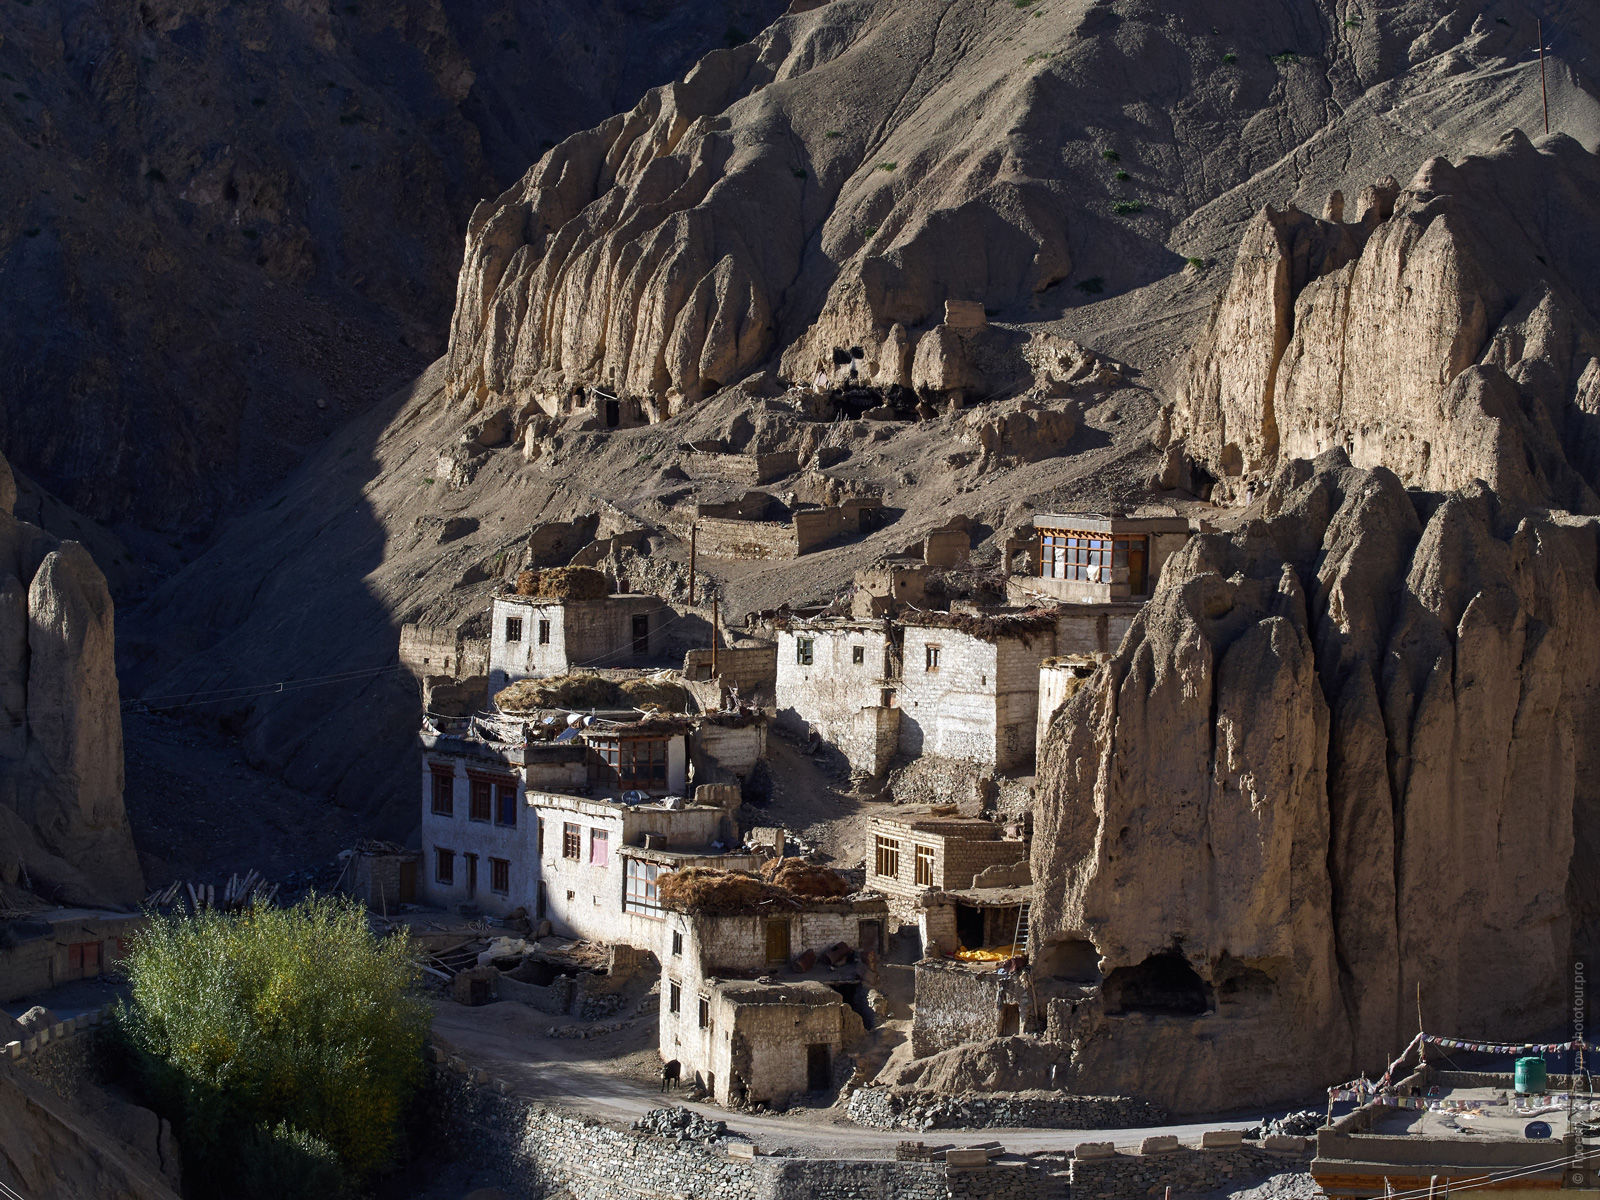 The village of Lamayuru. Tour for artists in Tibet: Watercolor-1: Watercolor painting in Ladakh with Pavel Pugachev, 04.08. - 13.08. 2019.